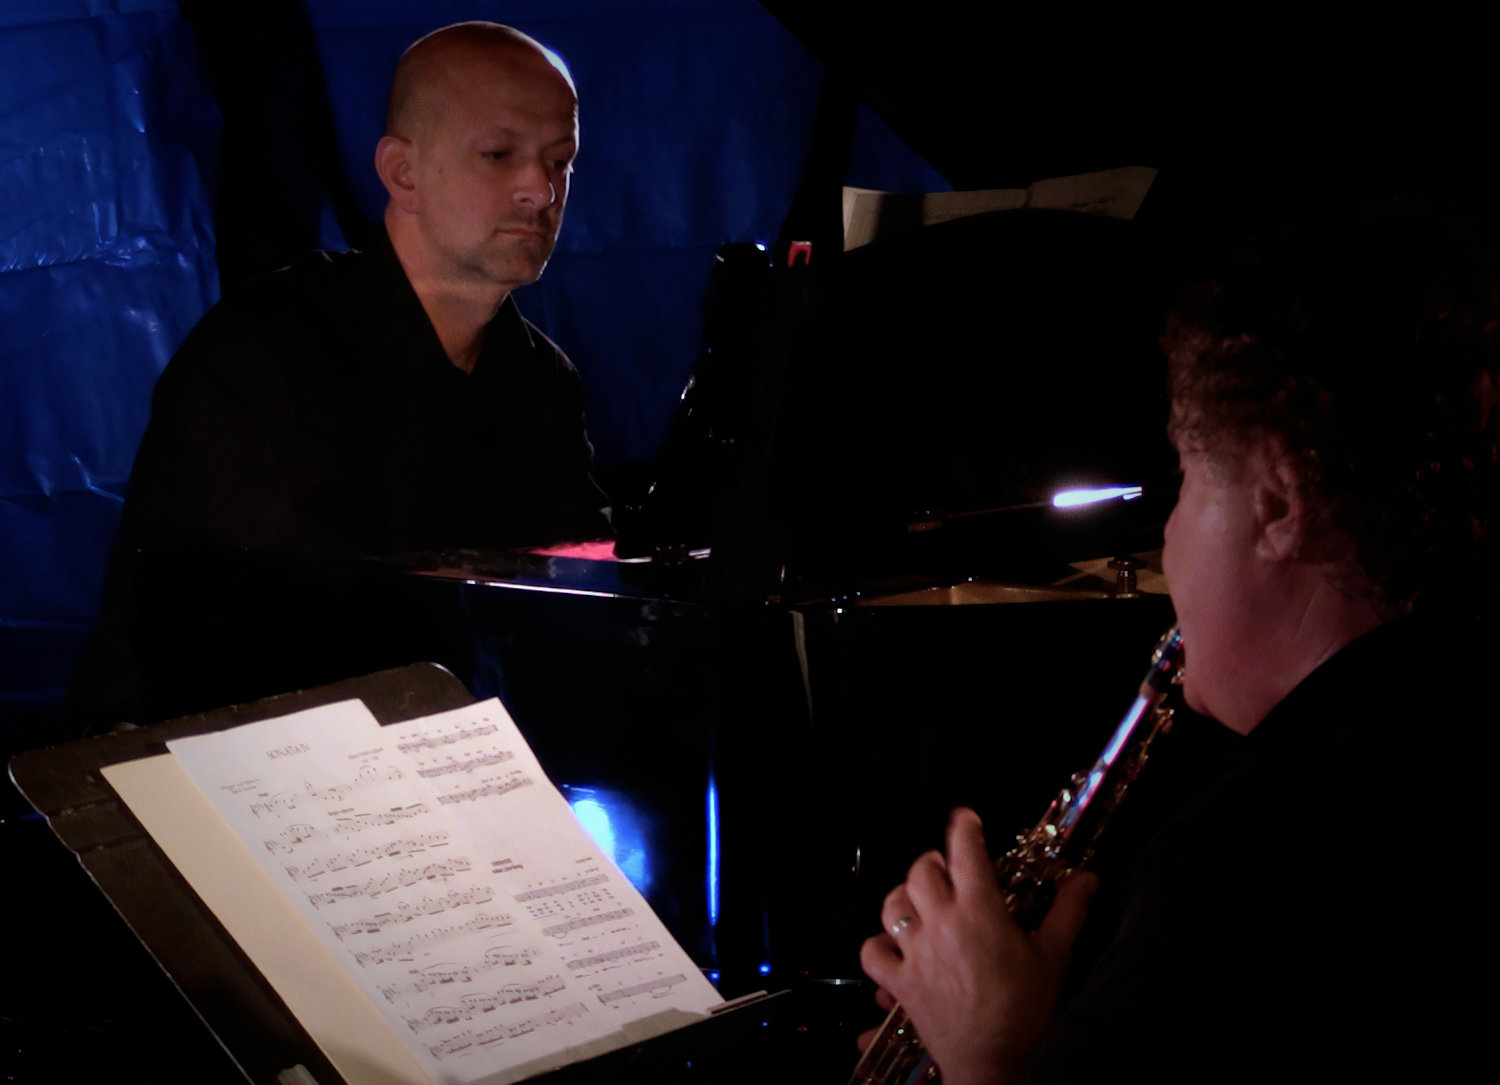 RIGHT NOTES — Matthew Donaleski, piano, and Darryl Sleszynski, soprano saxophone and clarinet, perform as part of a series to raise funds for the Herb Geller Memorial Scholarship Concert Series PREformance at Center Stage Music.